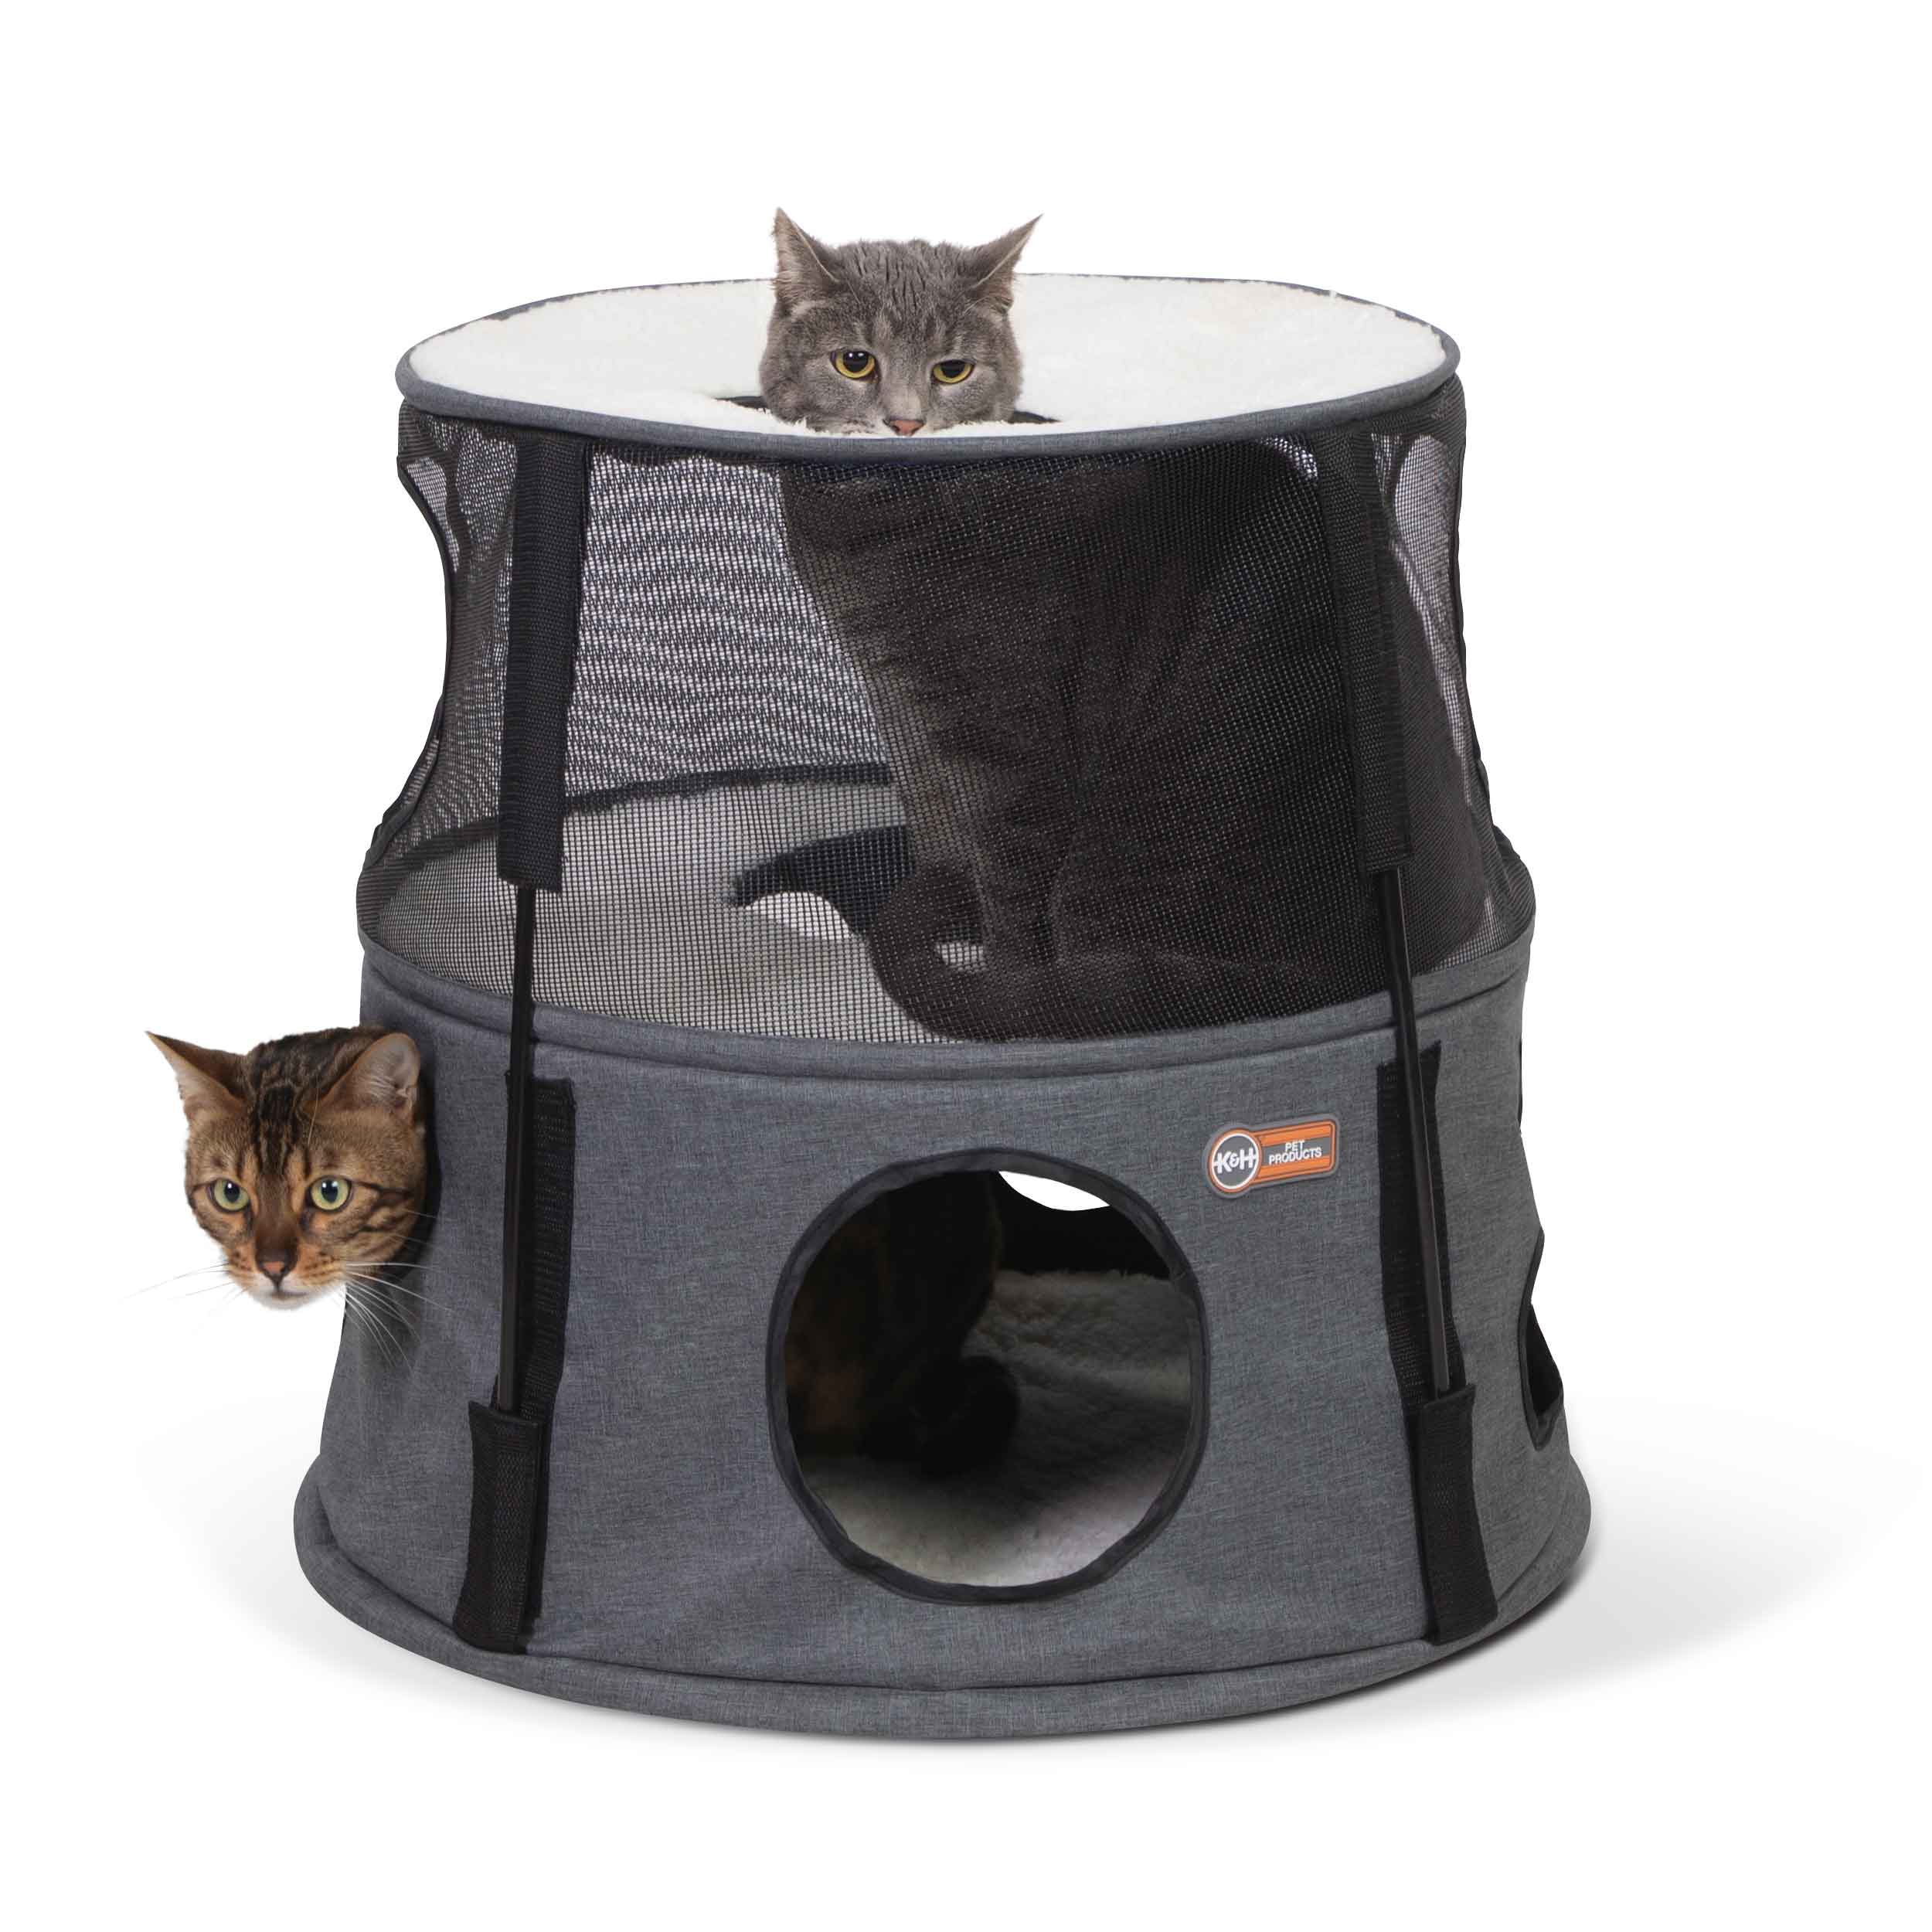 kh100550188 Kitty Tower 2 Story